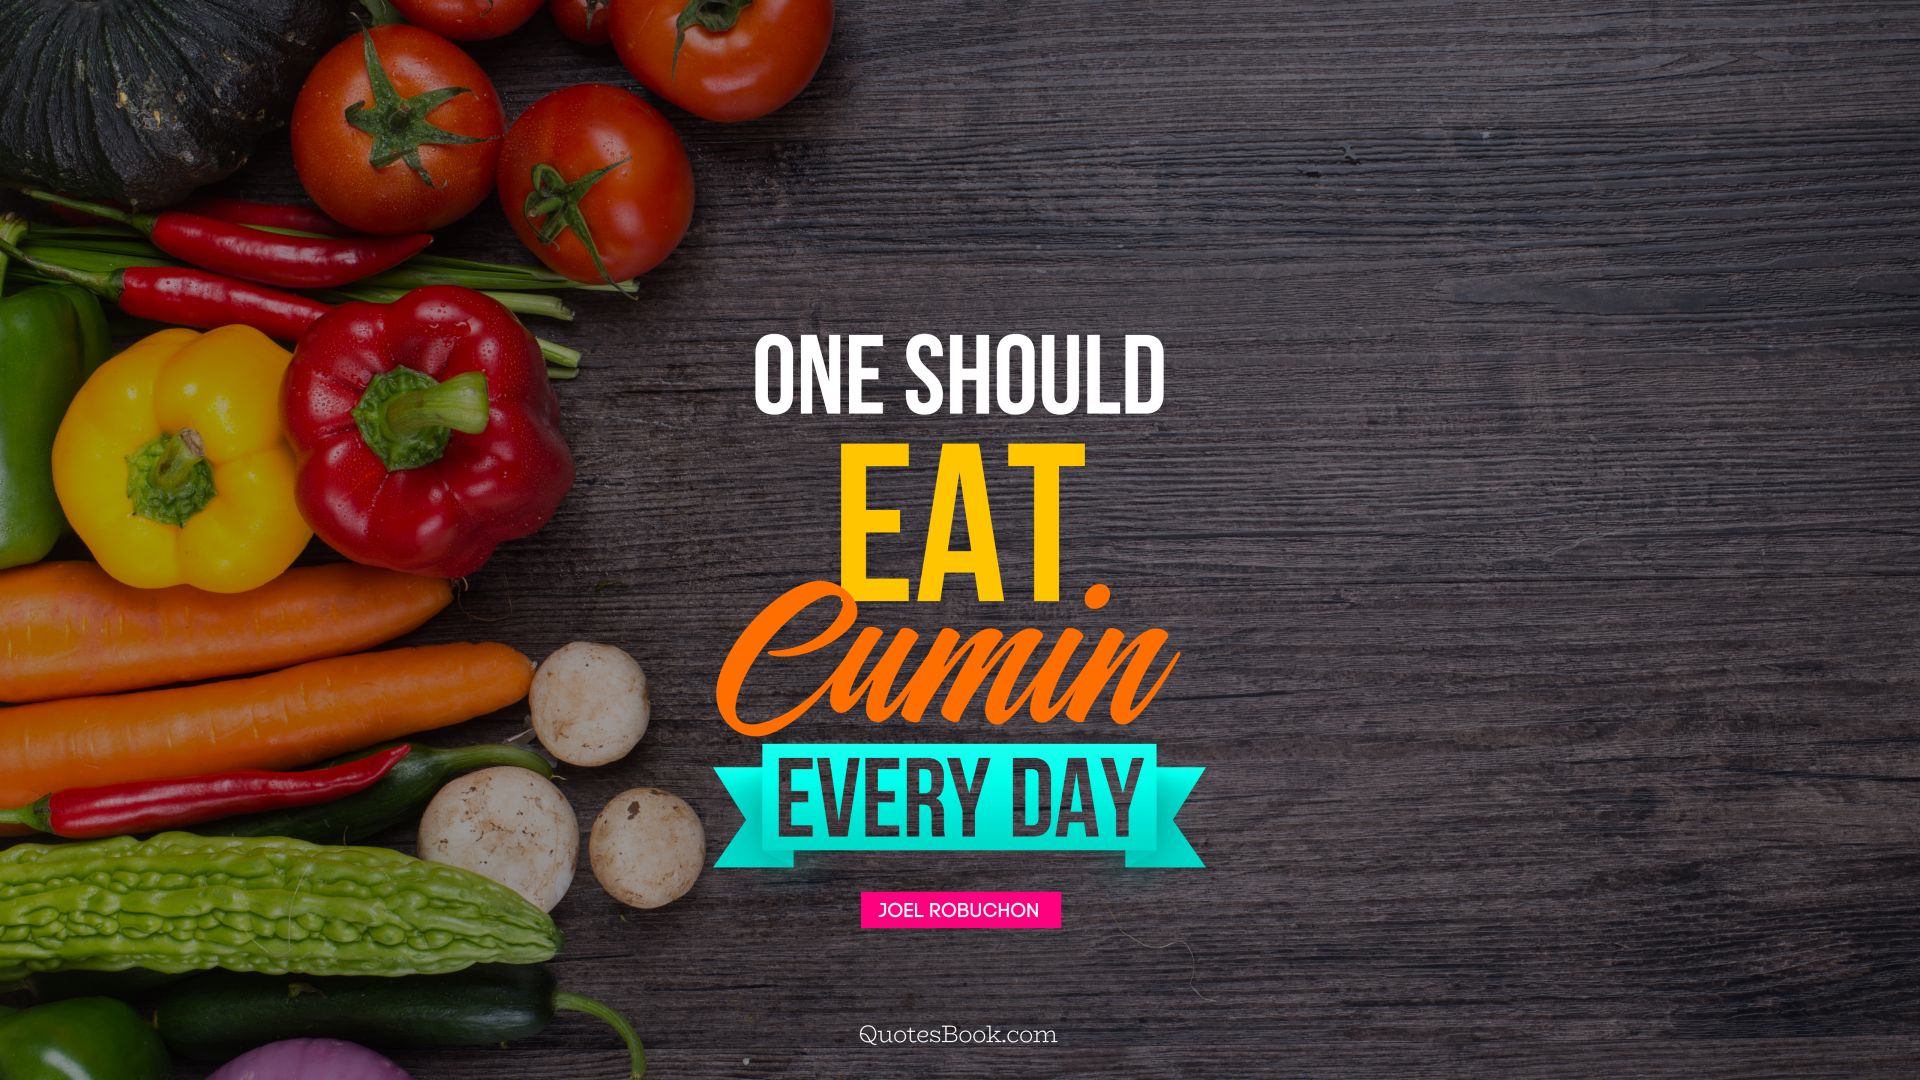 One should eat cumin every day. - Quote by Joel Robuchon